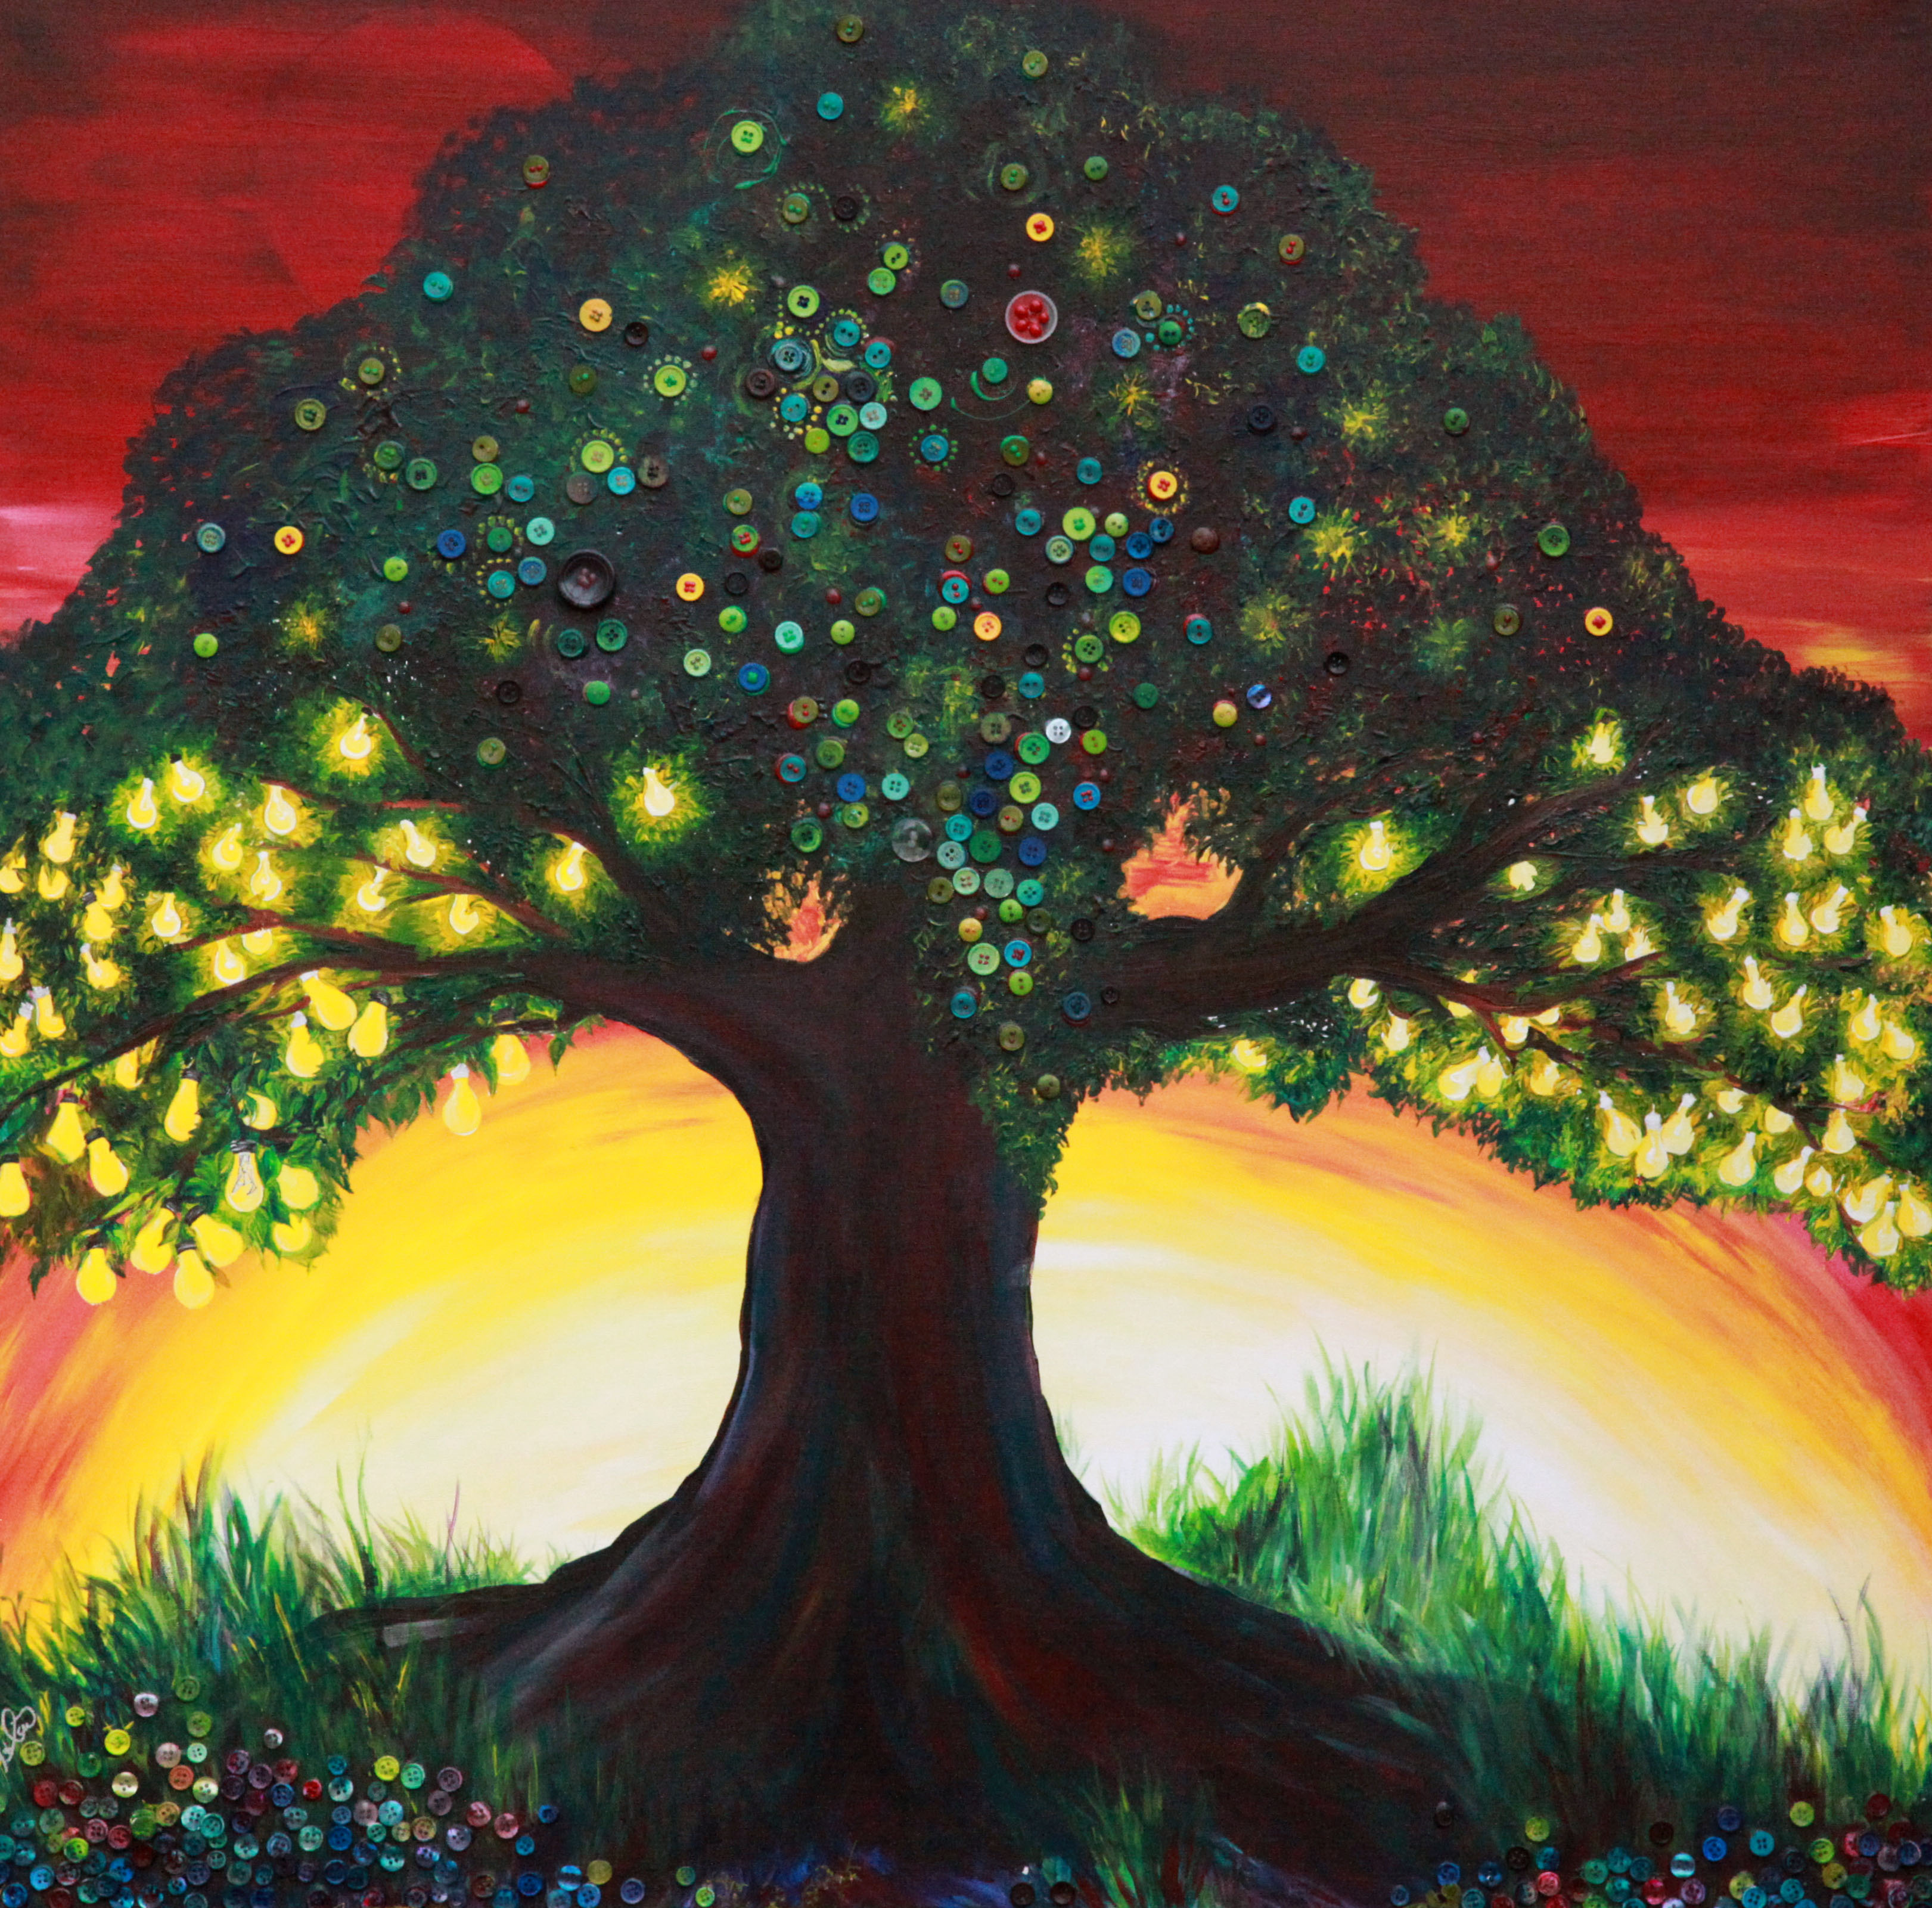 Tree of Knowledge by plane-in-the-sunset on DeviantArt